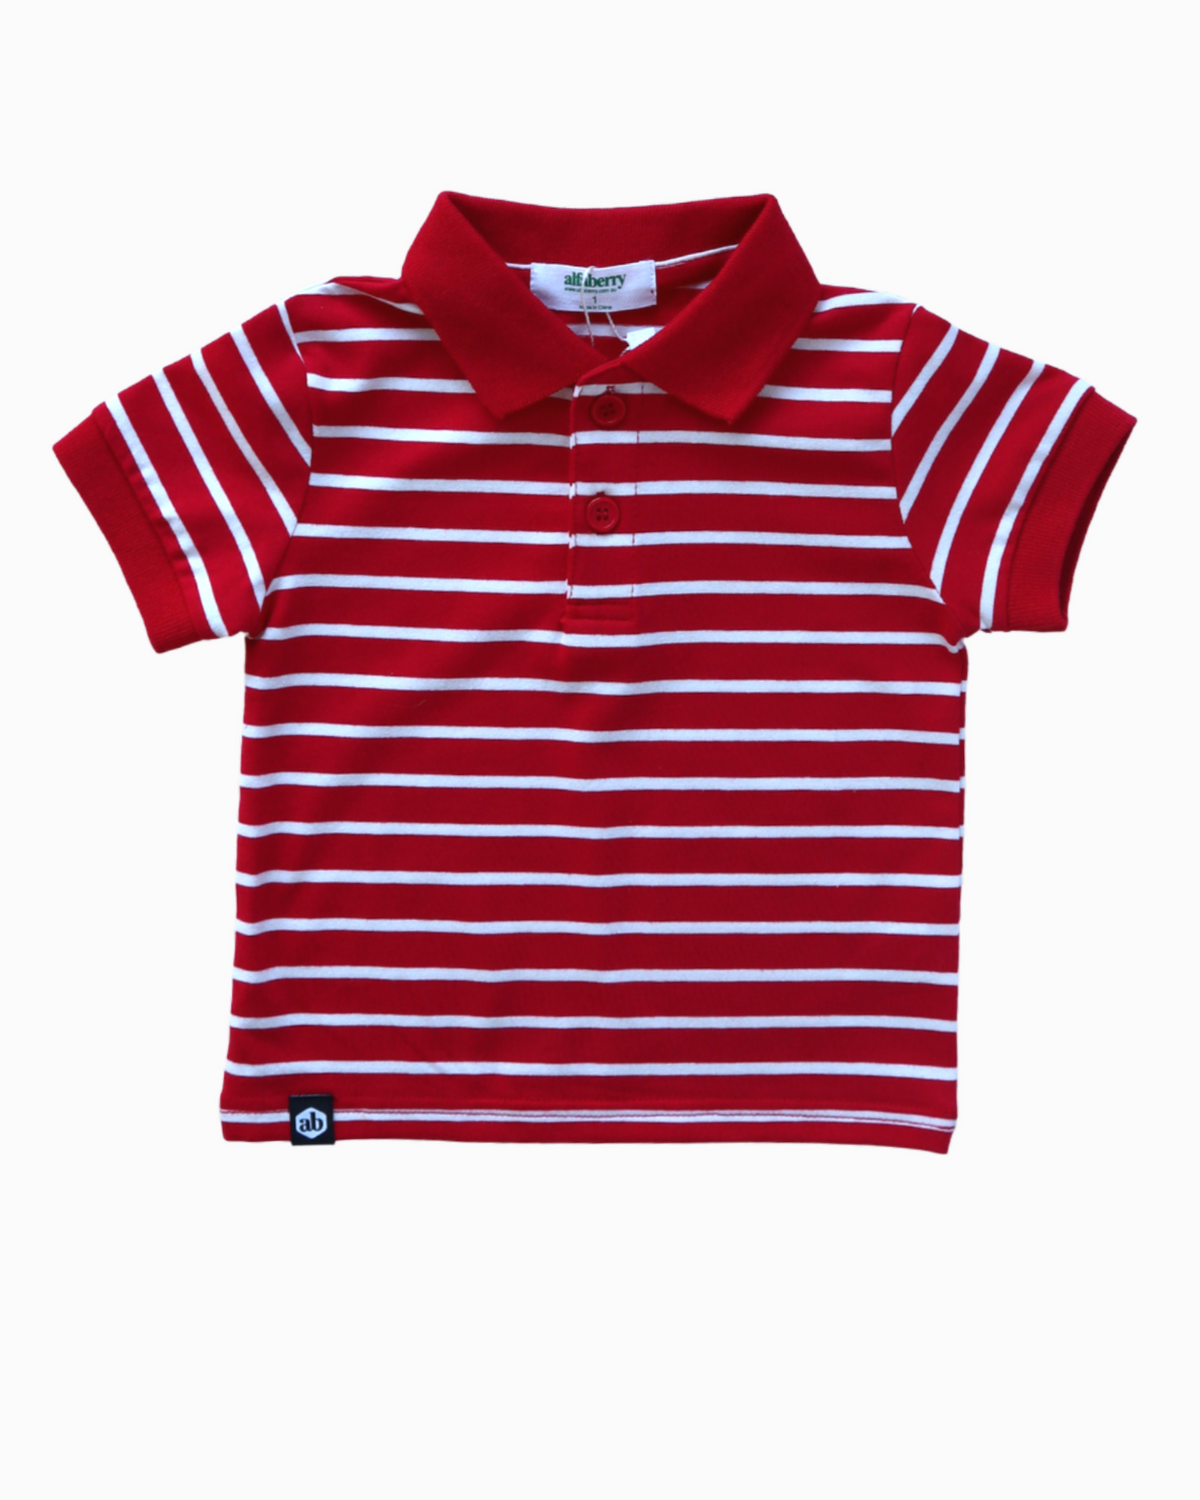 Classic Polo in White and Red Stripe